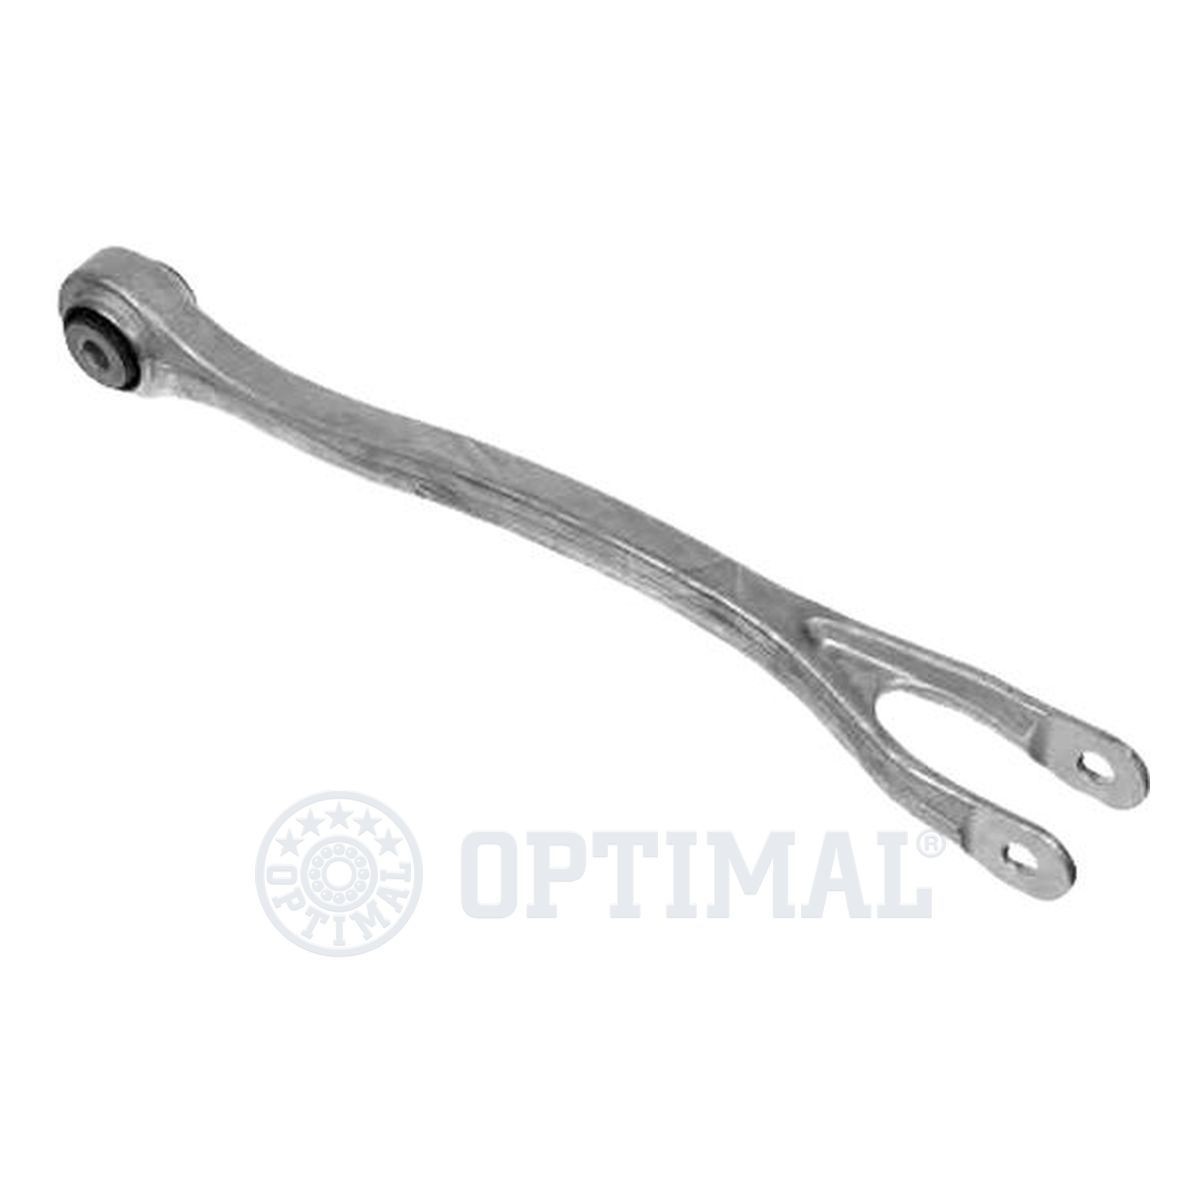 OPTIMAL G5-754 Suspension arm Rear Axle, Lower, Front, both sides, Control Arm